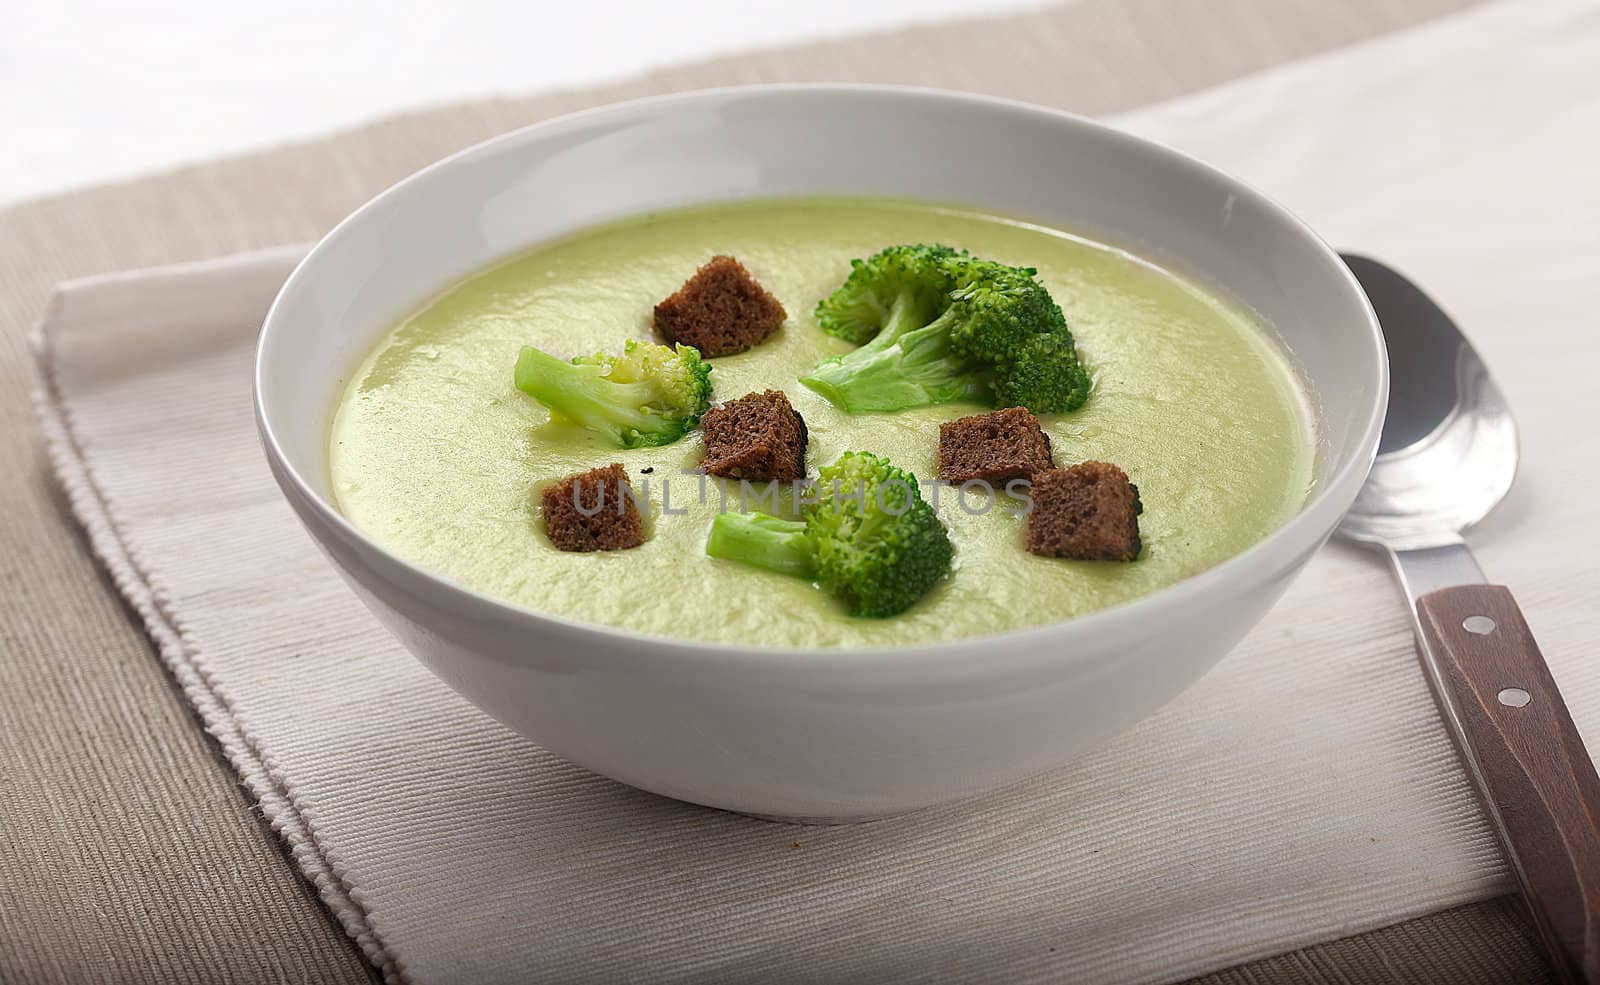 Cream soup with broccoli and dried crust in the white bowl on the napkin